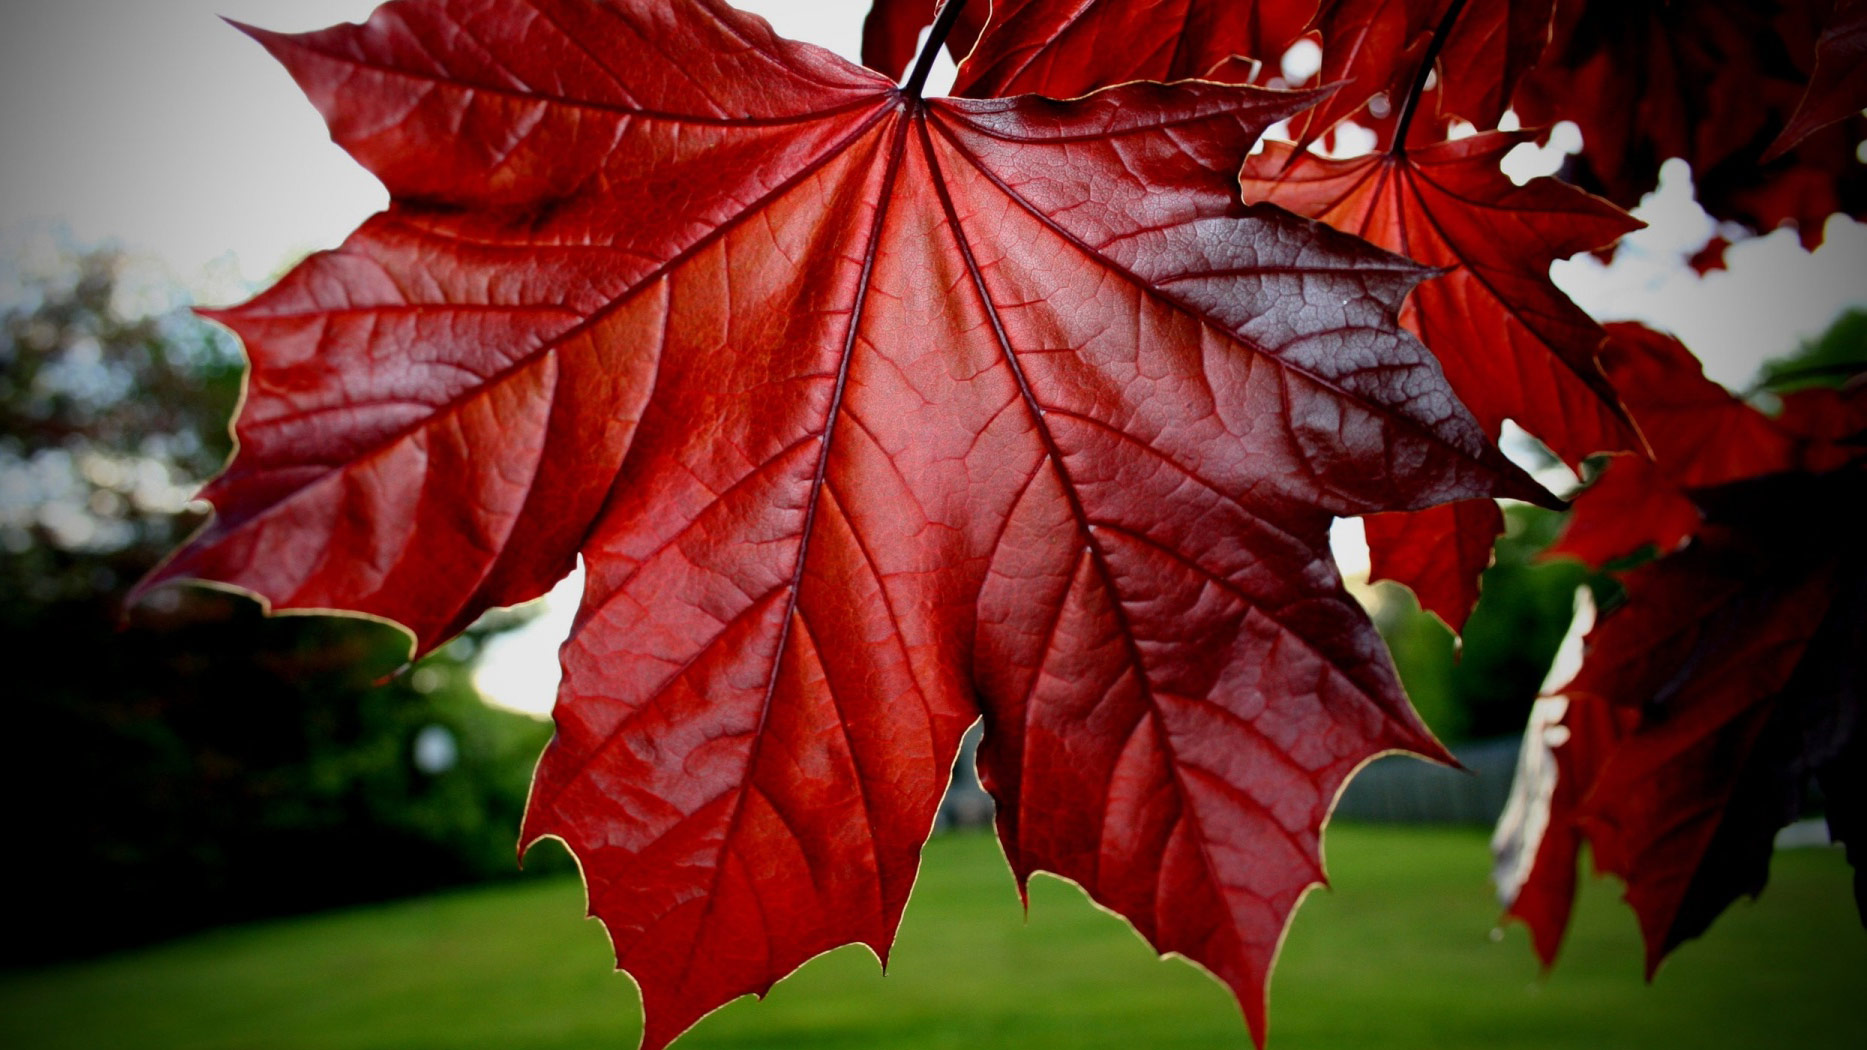 Red Maple Leaf Google Covers - Google Plus Covers Photos